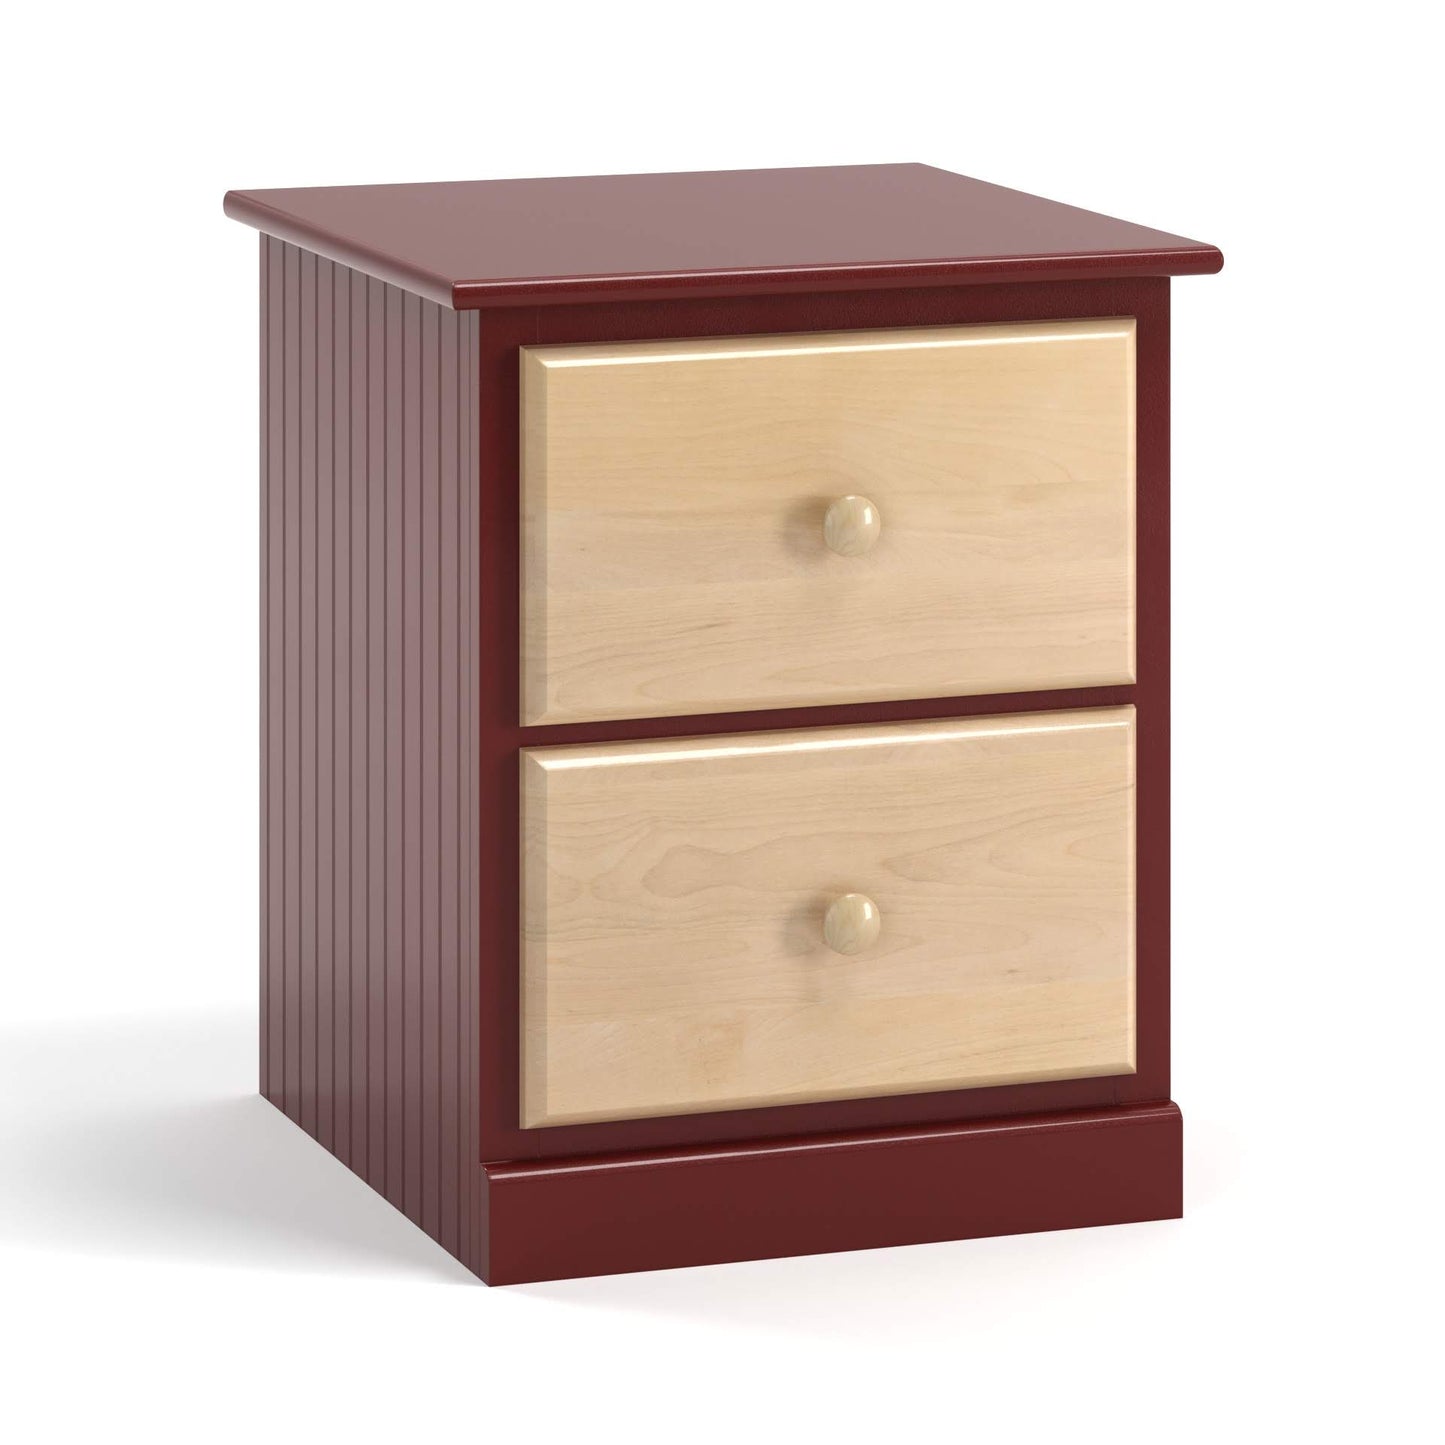 A birch two drawer nighstand, with full extension glides and bead board sides. Finish shown is natural and red heritage.